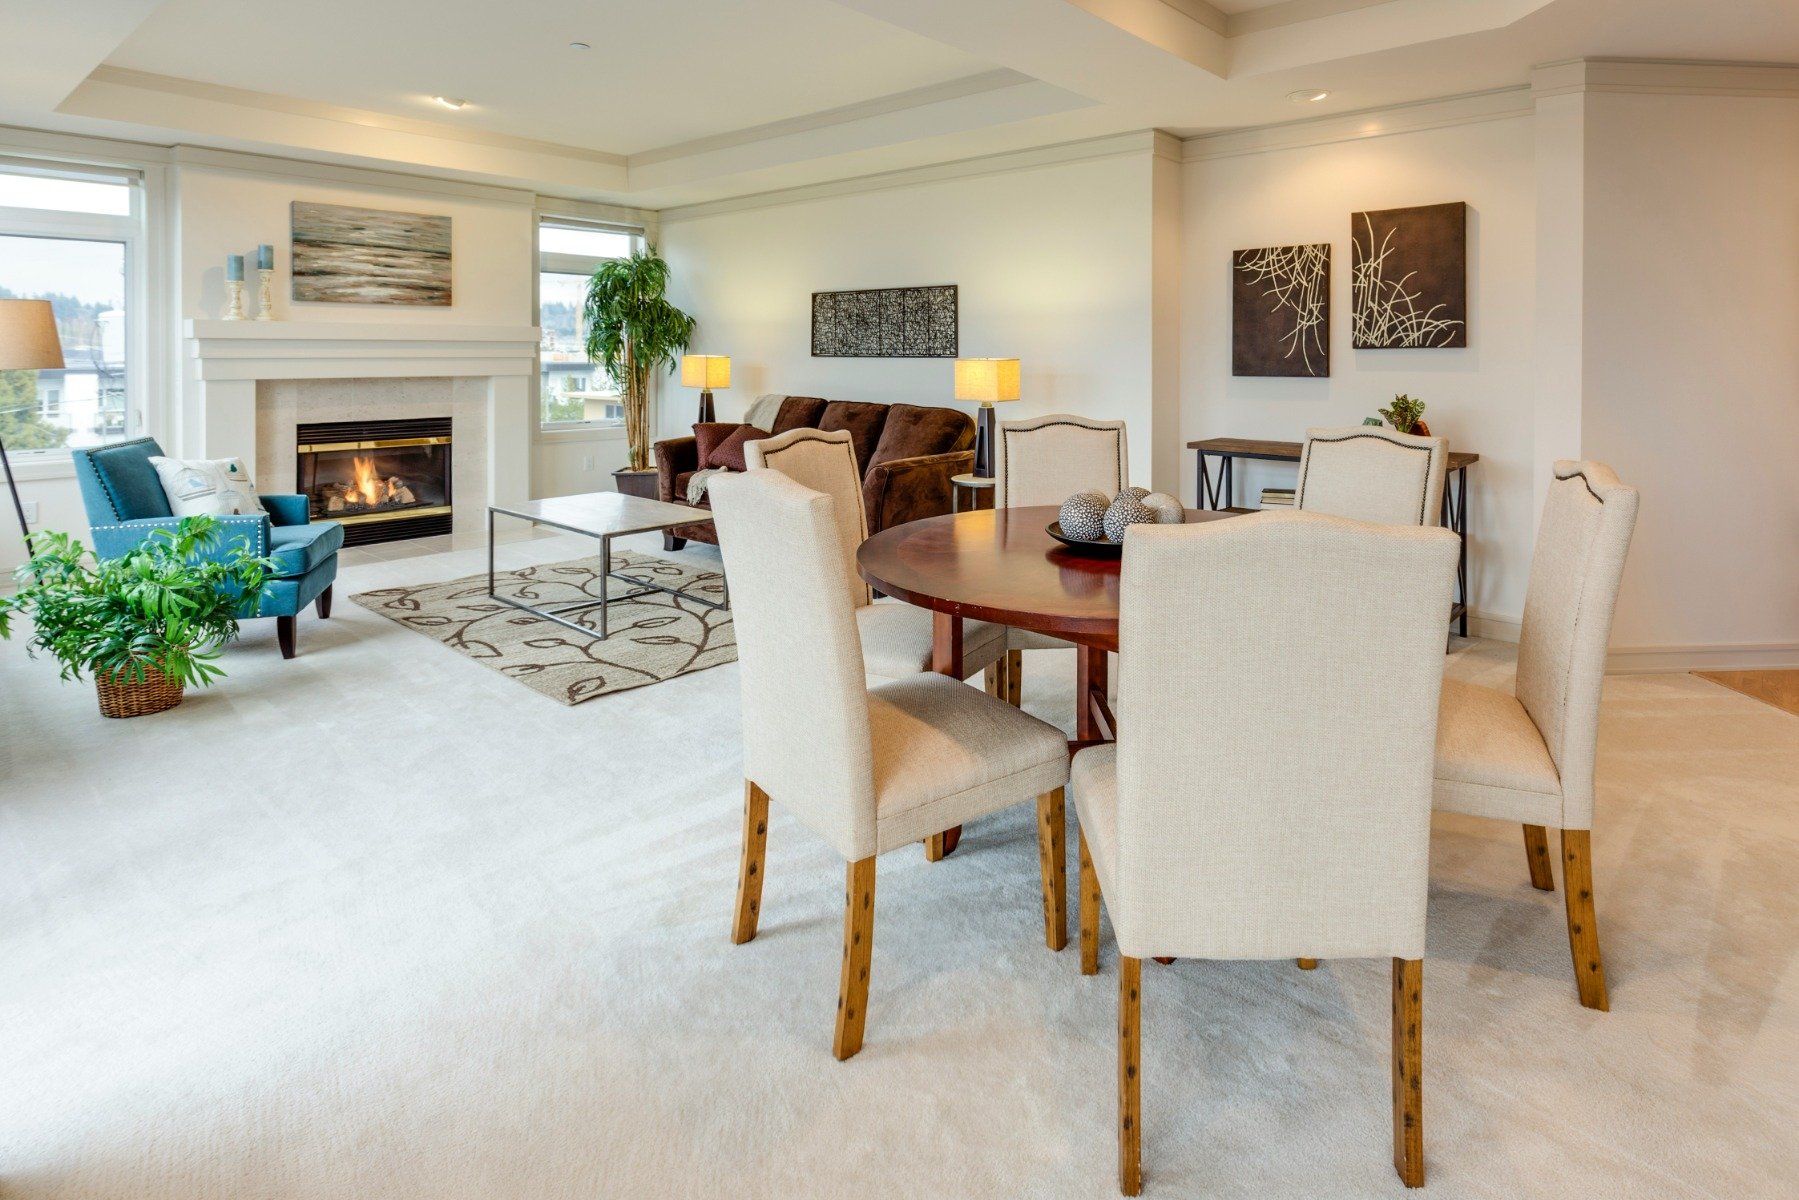 White fireplace in a large living room with beige chairs